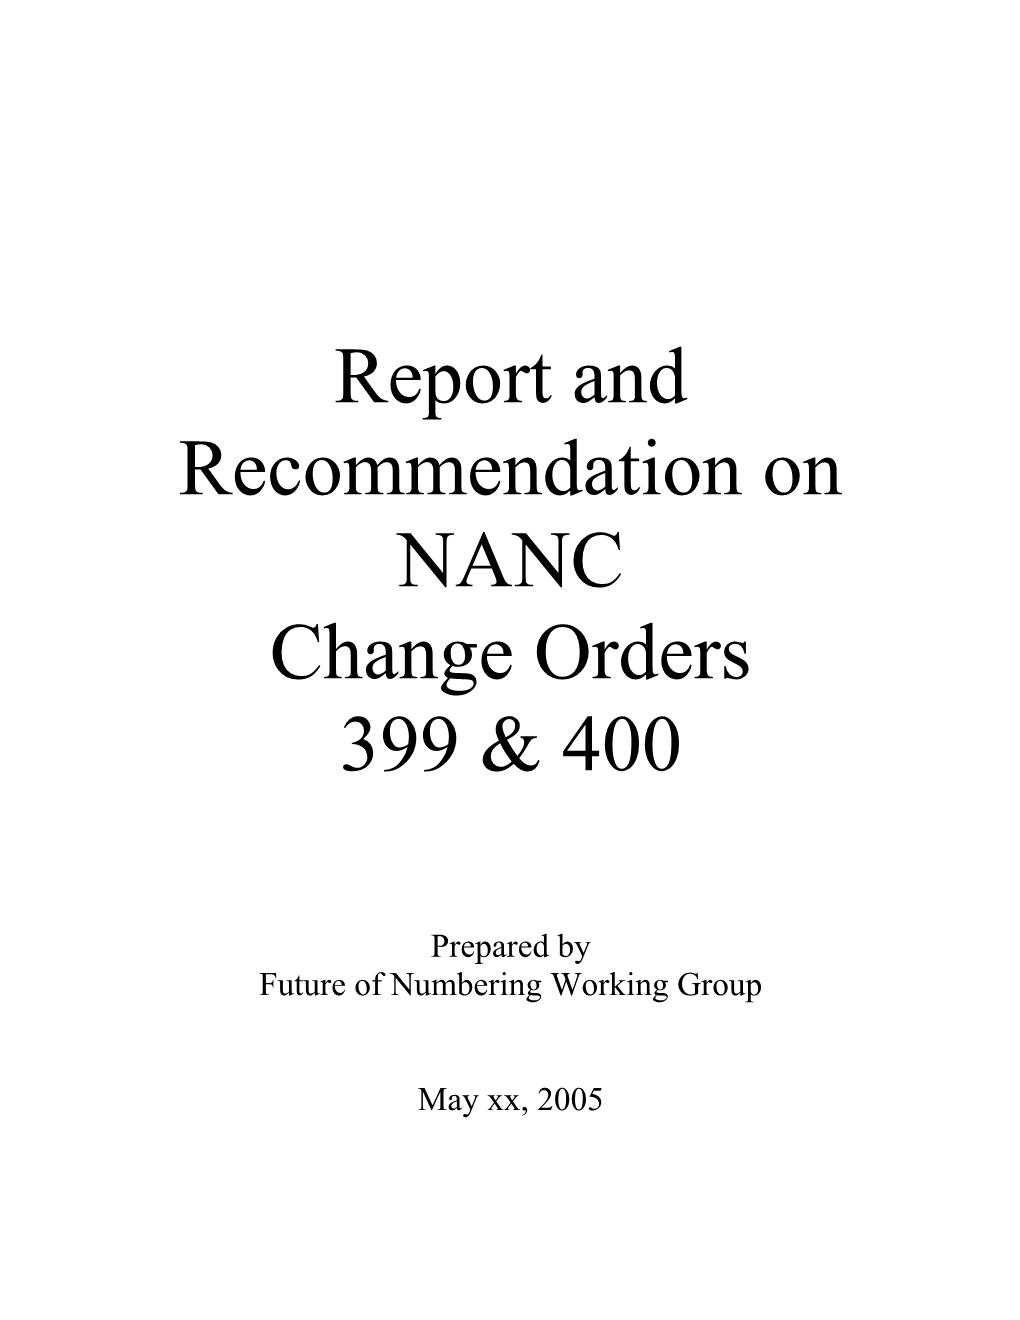 Report and Recommendation on NANC Change Orders 399 and 400